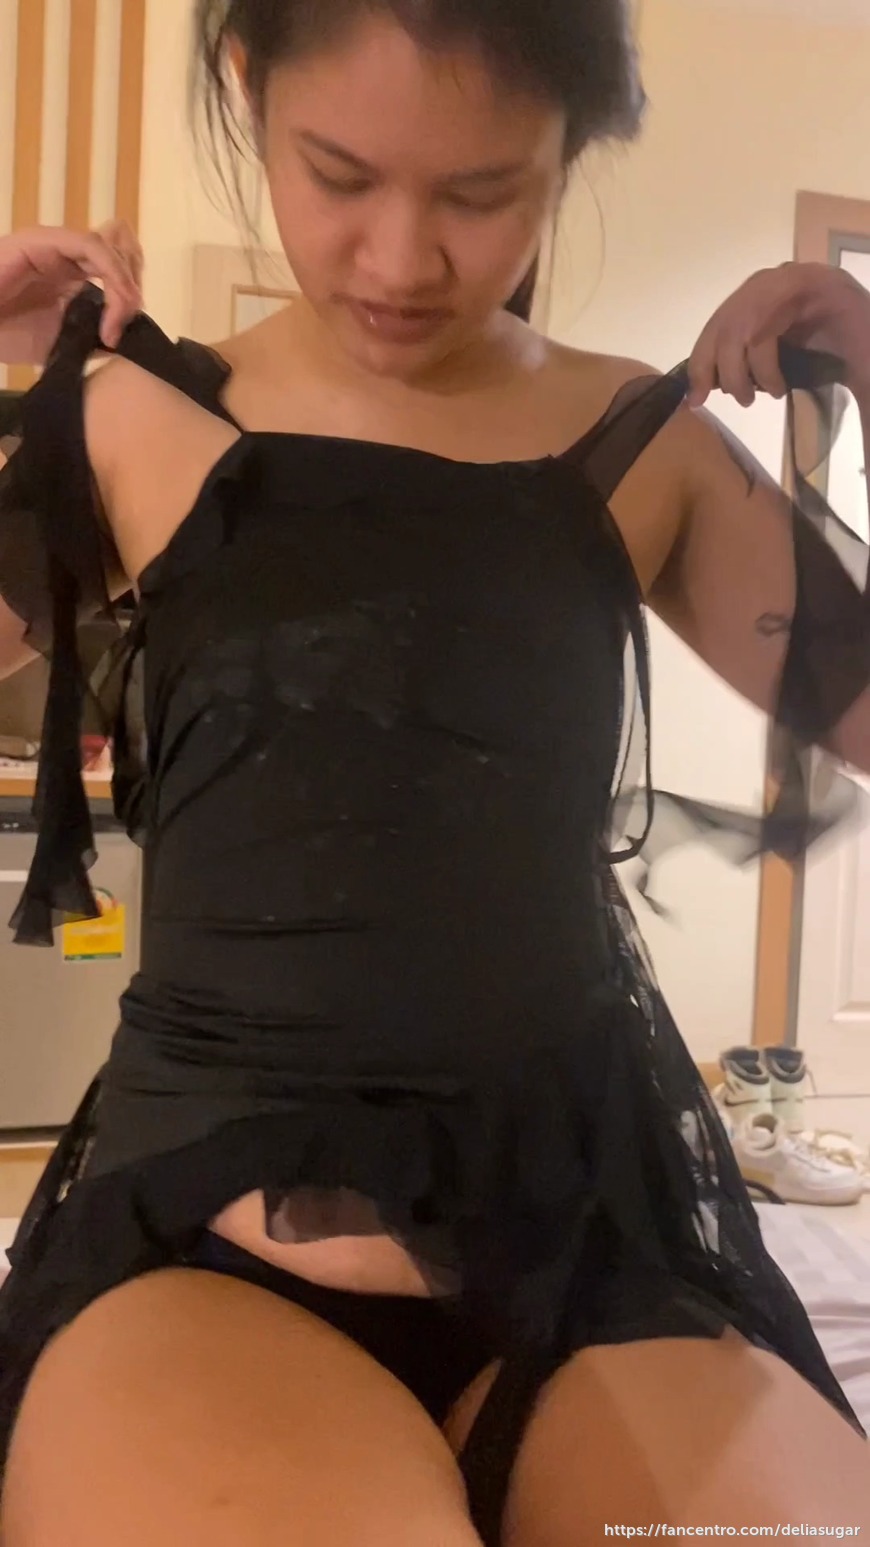 Two cumshots for me and my slut outfit